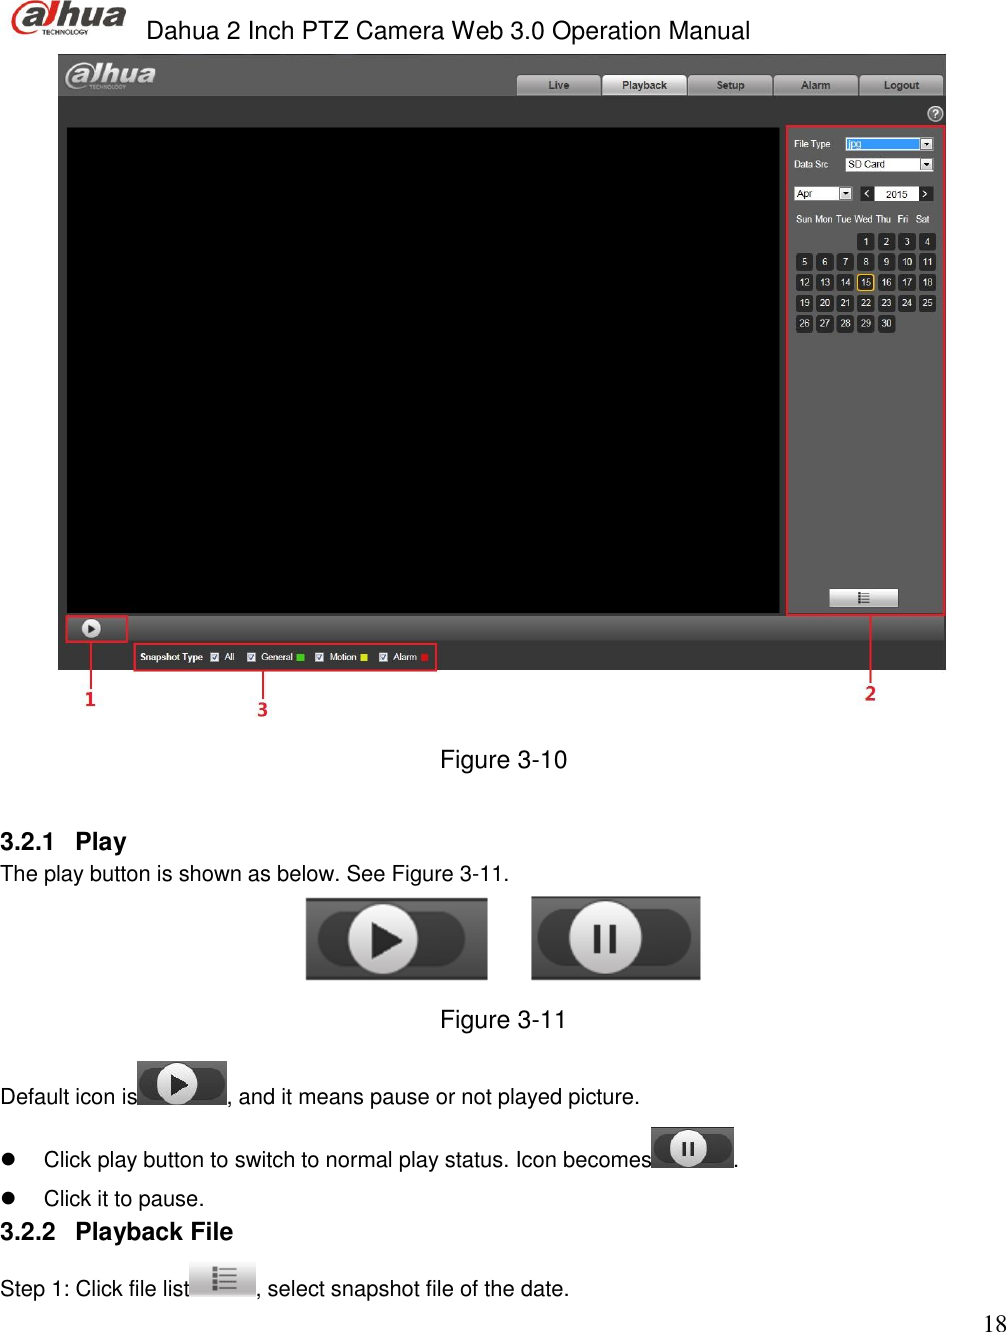  Dahua 2 Inch PTZ Camera Web 3.0 Operation Manual                                                                             18  Figure 3-10  3.2.1  Play  The play button is shown as below. See Figure 3-11.  Figure 3-11 Default icon is , and it means pause or not played picture.    Click play button to switch to normal play status. Icon becomes .    Click it to pause.  3.2.2  Playback File Step 1: Click file list , select snapshot file of the date.  